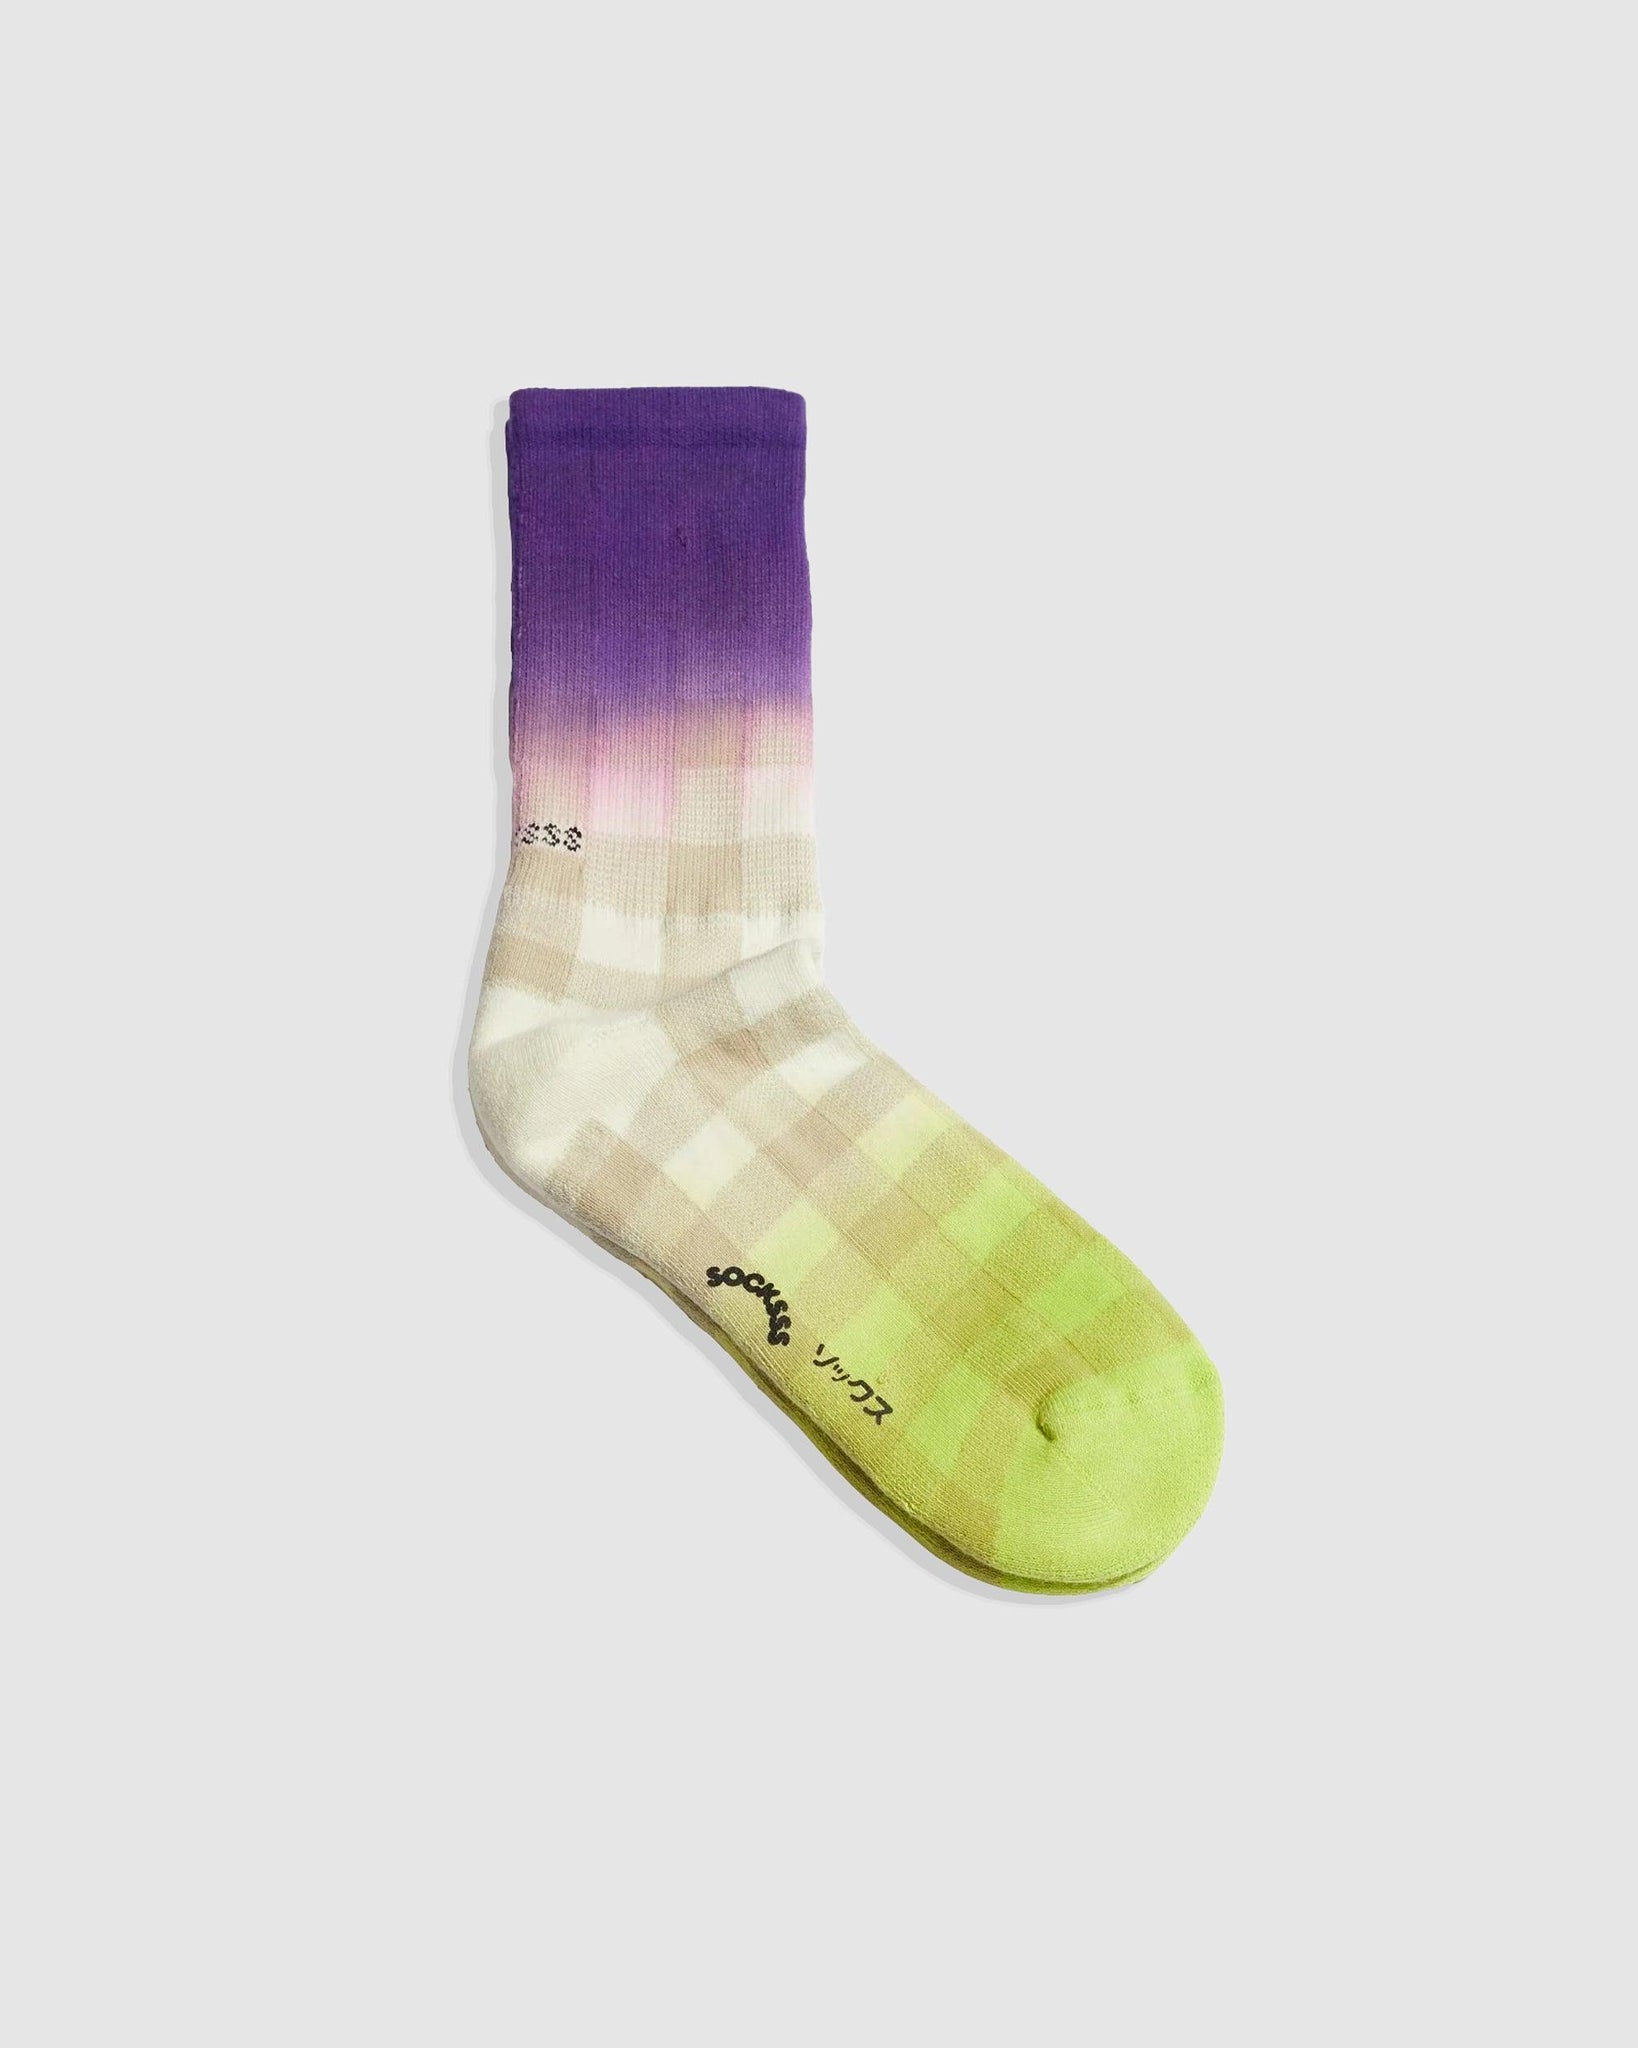 Ectoplasma Socks - {{ collection.title }} - Chinatown Country Club 